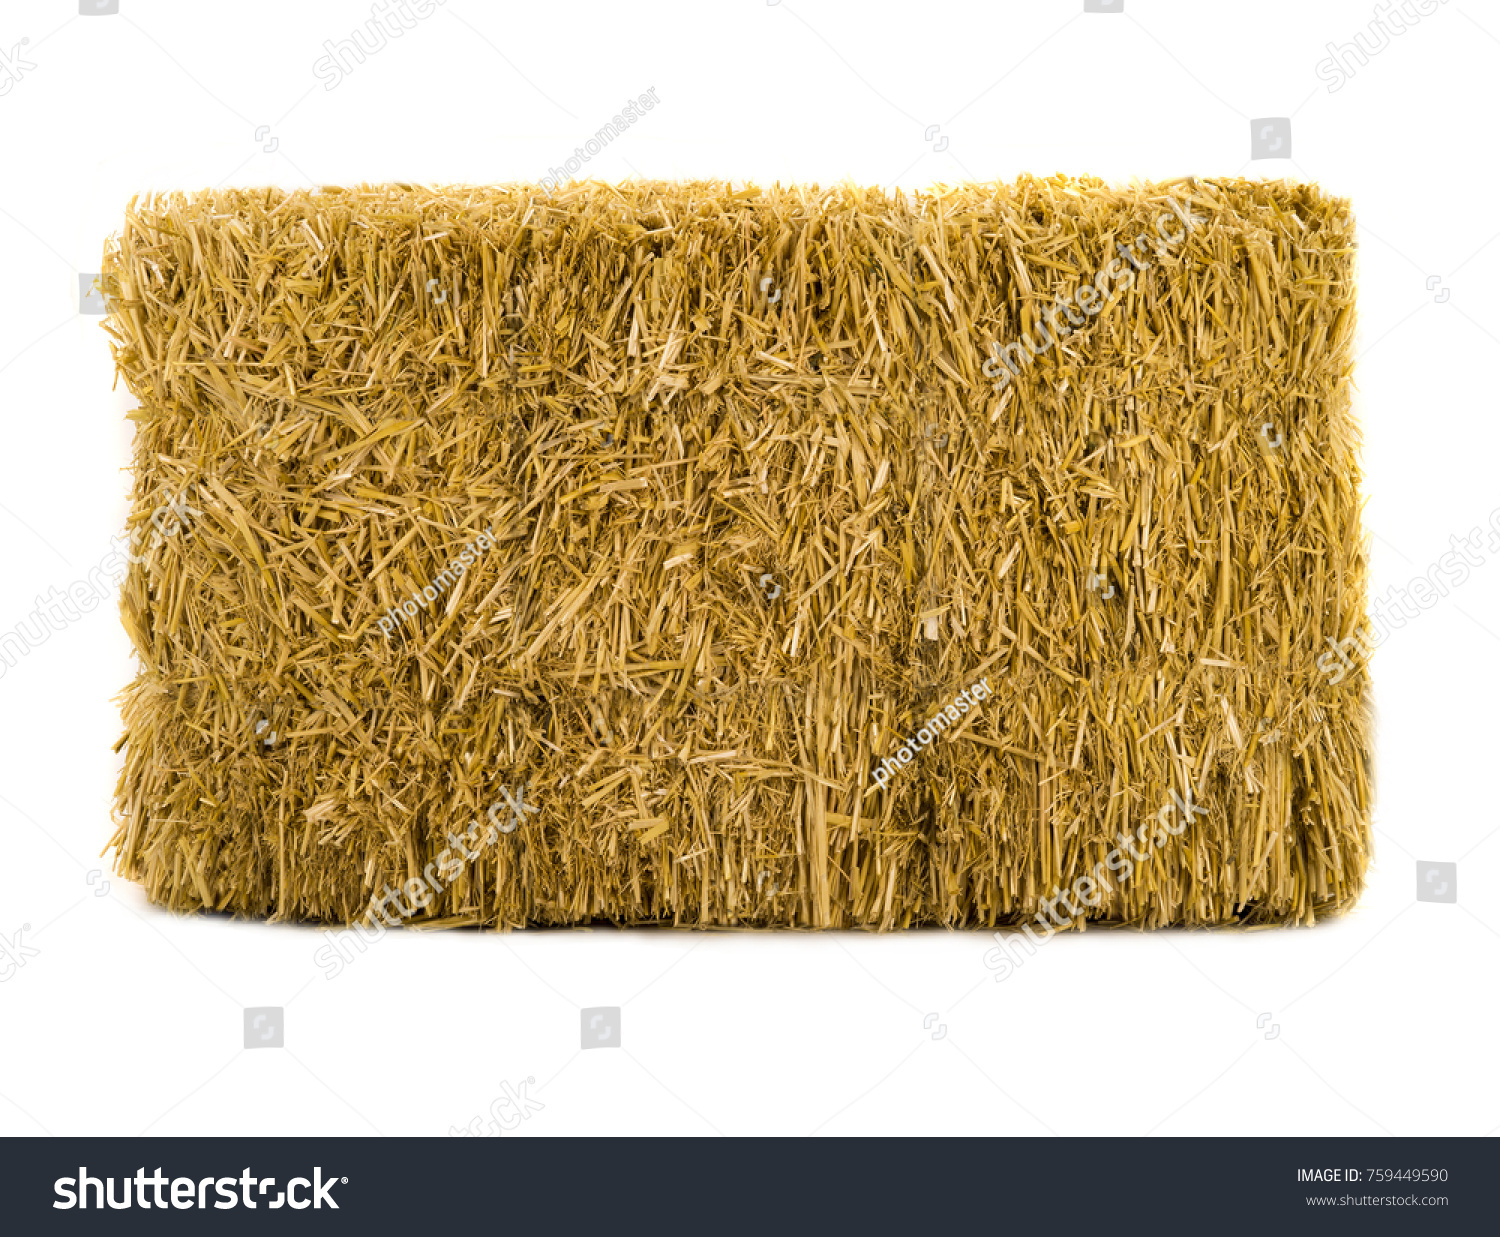 hay isolated on a white background #759449590